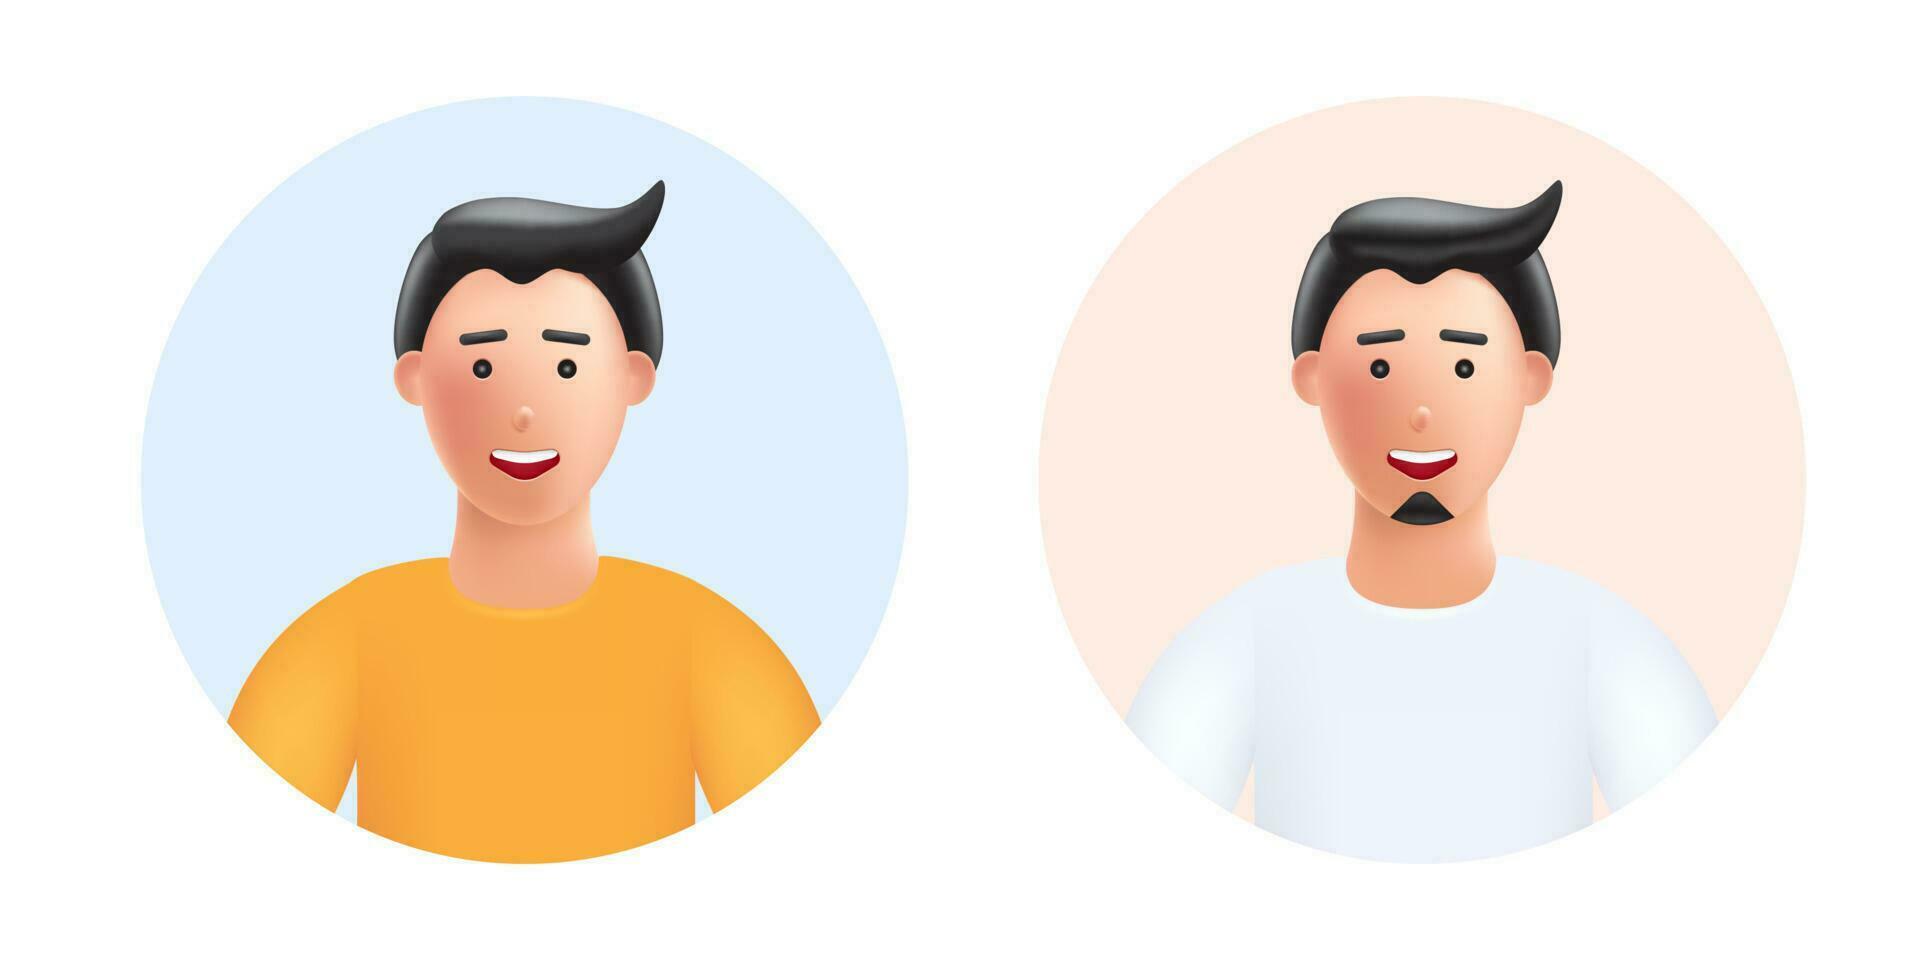 Smiling young man avatar with little black beard and no mustache, 3d vector people illustration. Cartoon minimalist style.